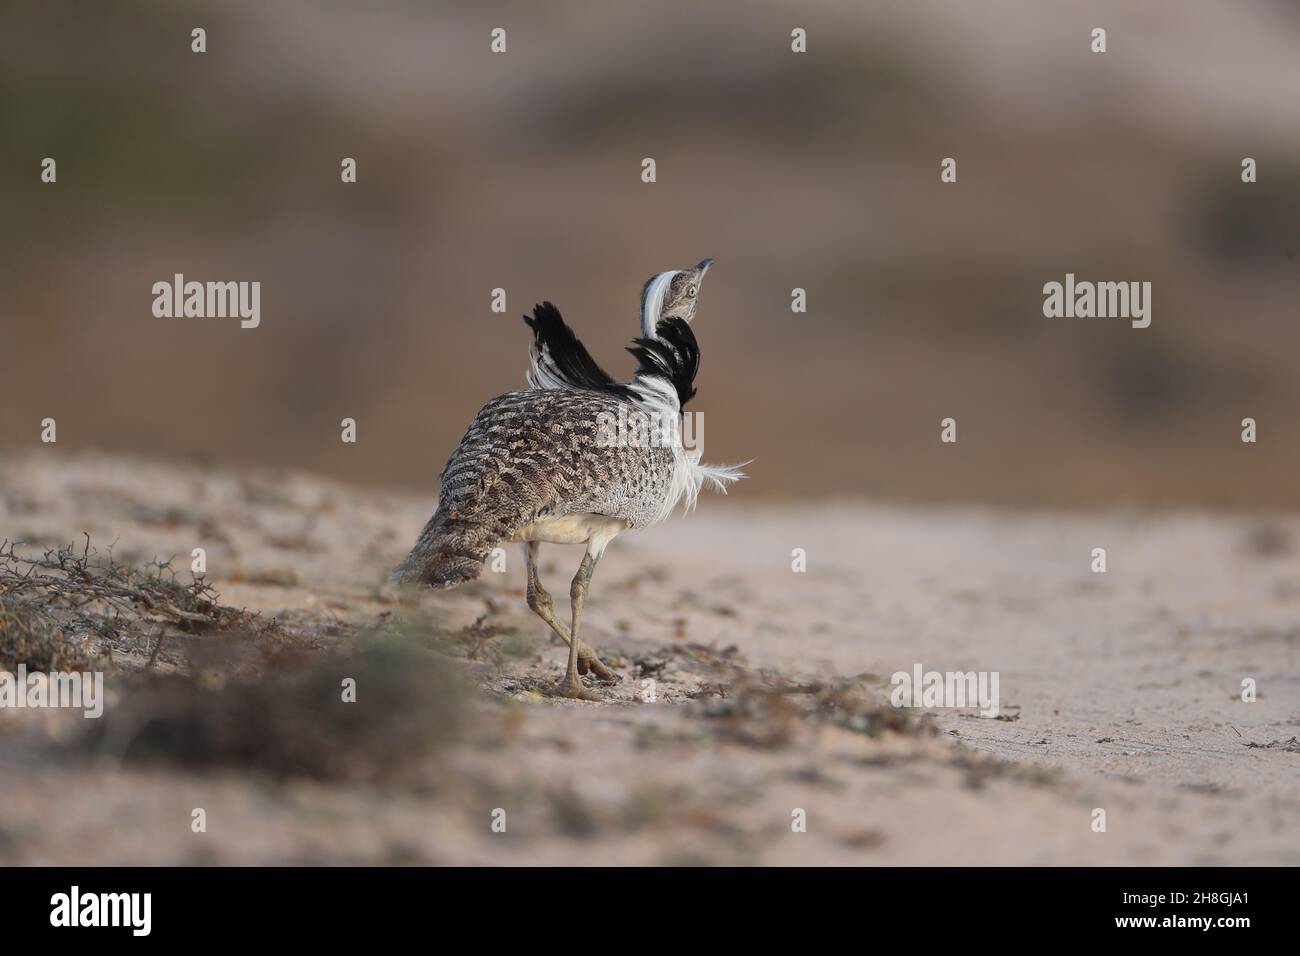 Houbara Bustards are a protected species on the Canary Islands.  During the breeding season the males develop neck plumes which they use to display. Stock Photo